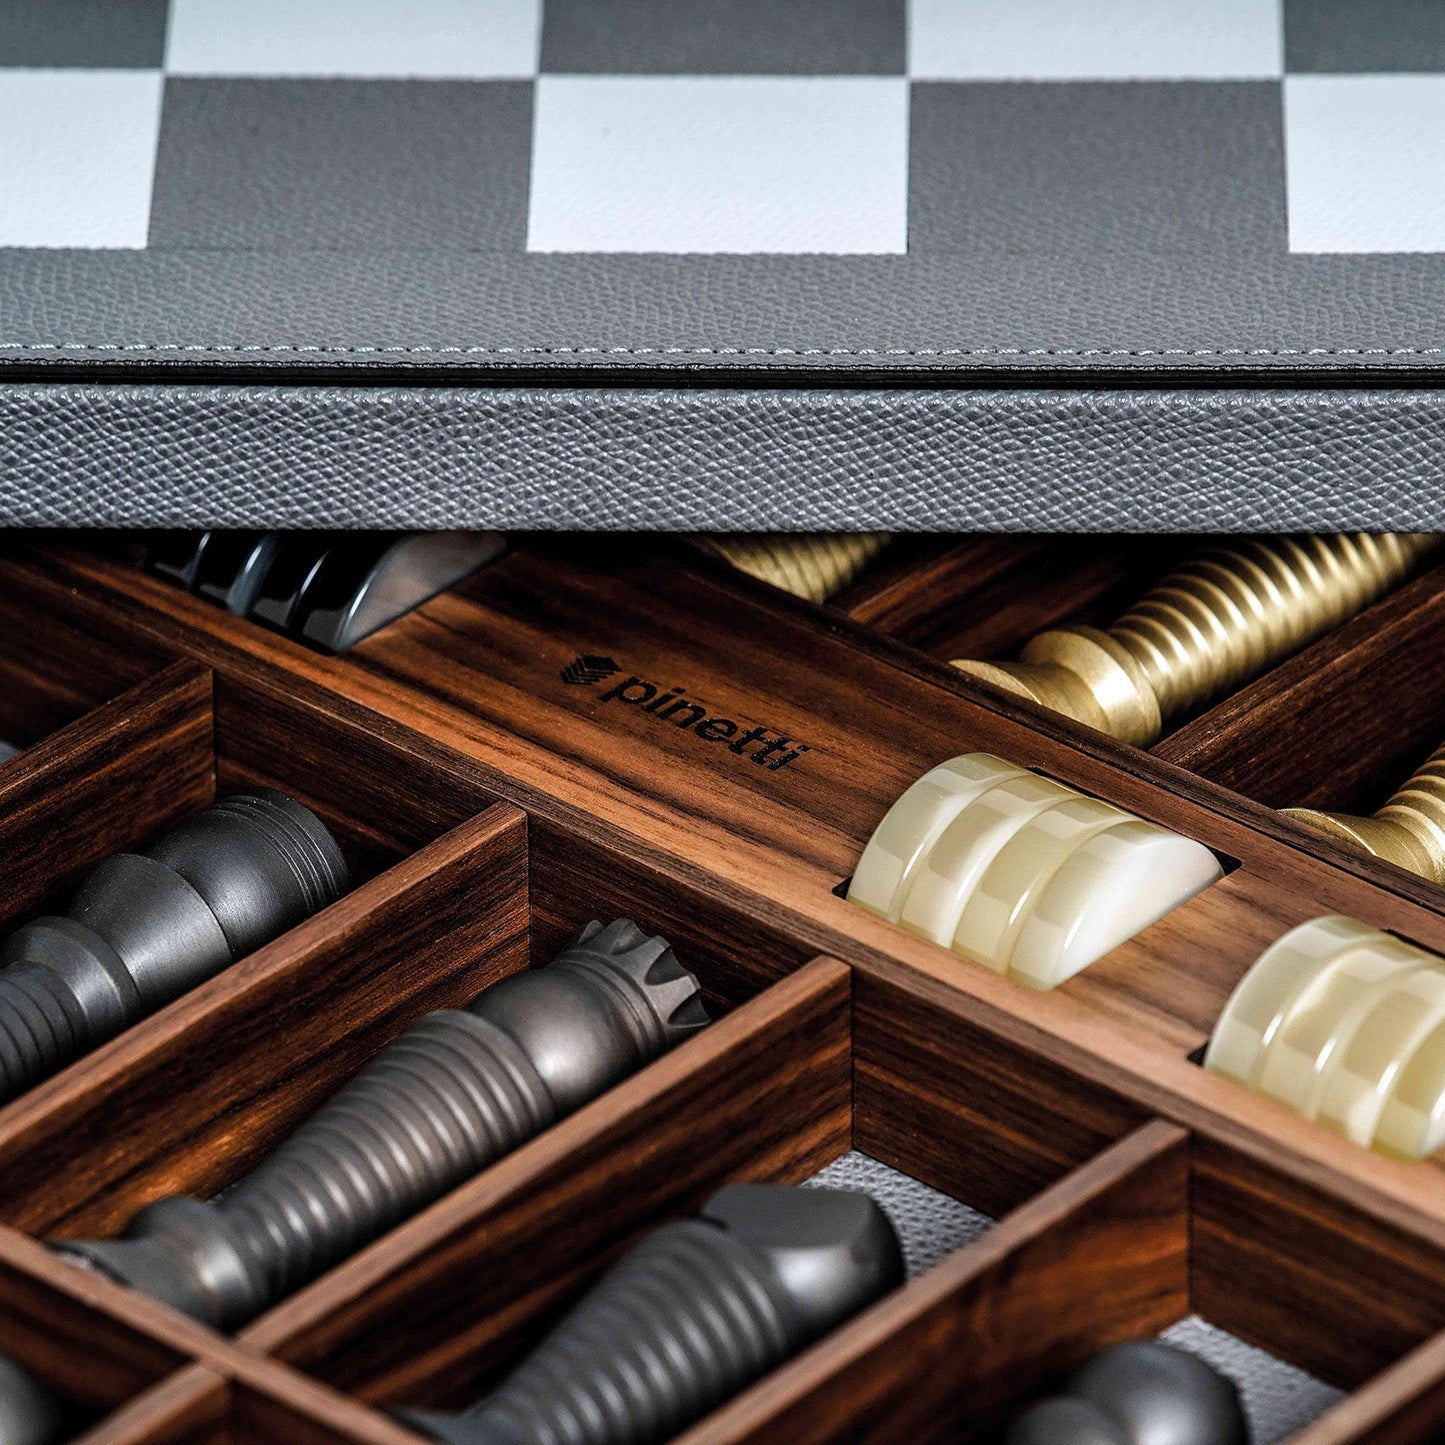 Chess & Checkers Leather Game